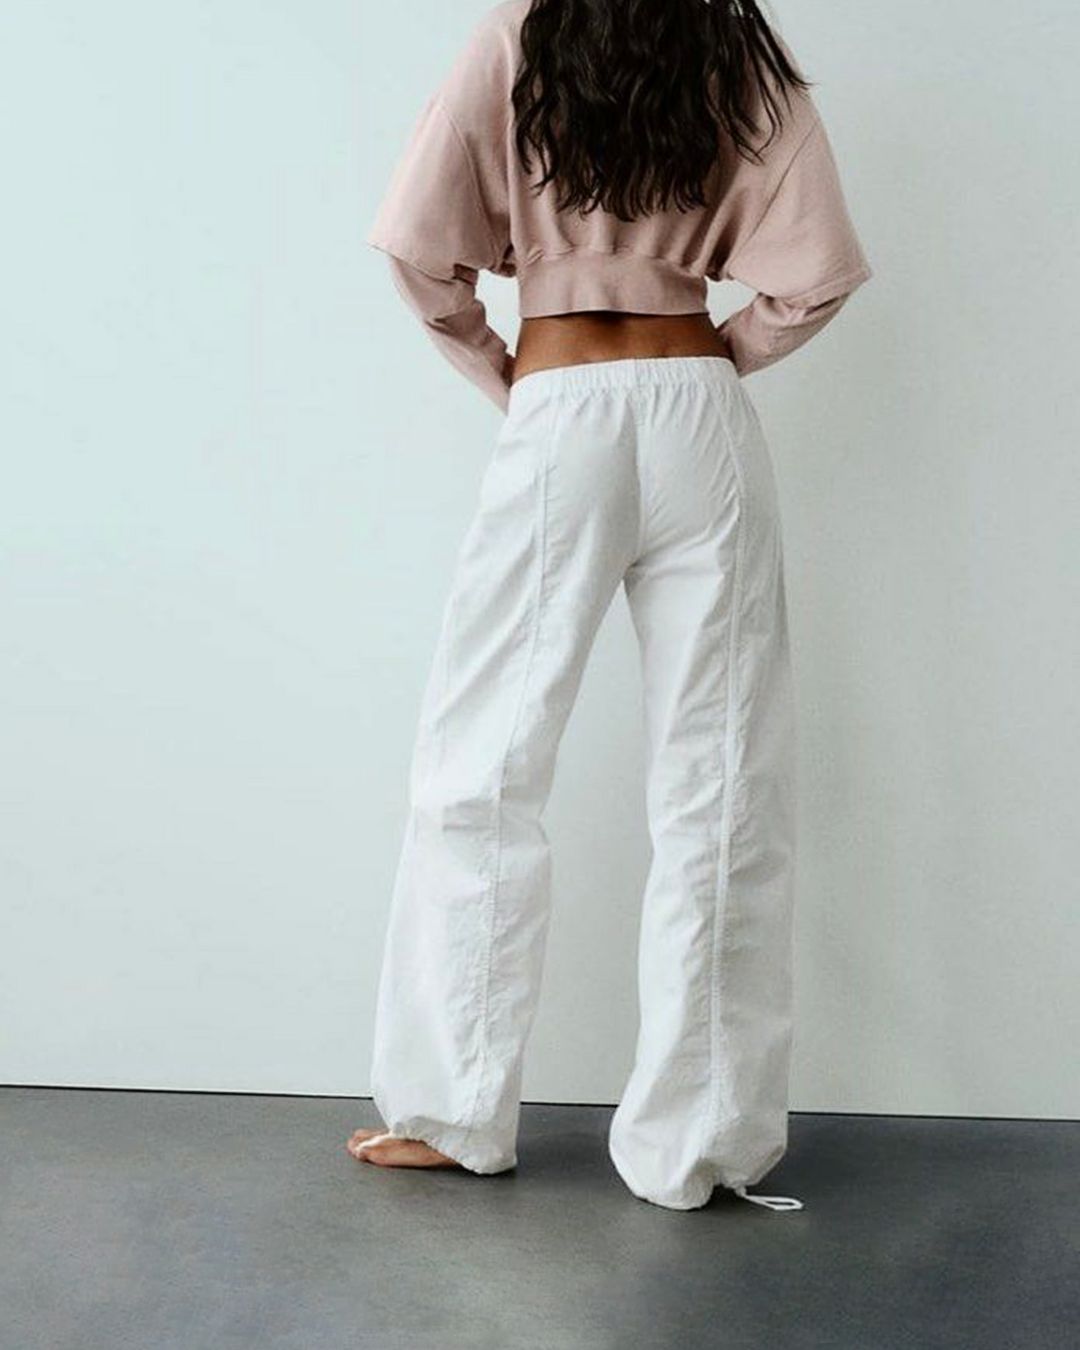 PARACHUTE PANTS,baggy fit, bottomwear, casual, cotton, drawstring, full length, mid rise, parachutes, streetwear, white, woven,parachute-pants-white,Color- White
Fabric- Cotton
Fit- Baggy Fit 
Length- Full Length (41in)
Waist- High Rise
Hem- Drawstring Hem
Closure- Elasticated Waist
No. of Pockets- 2
Print- Solid